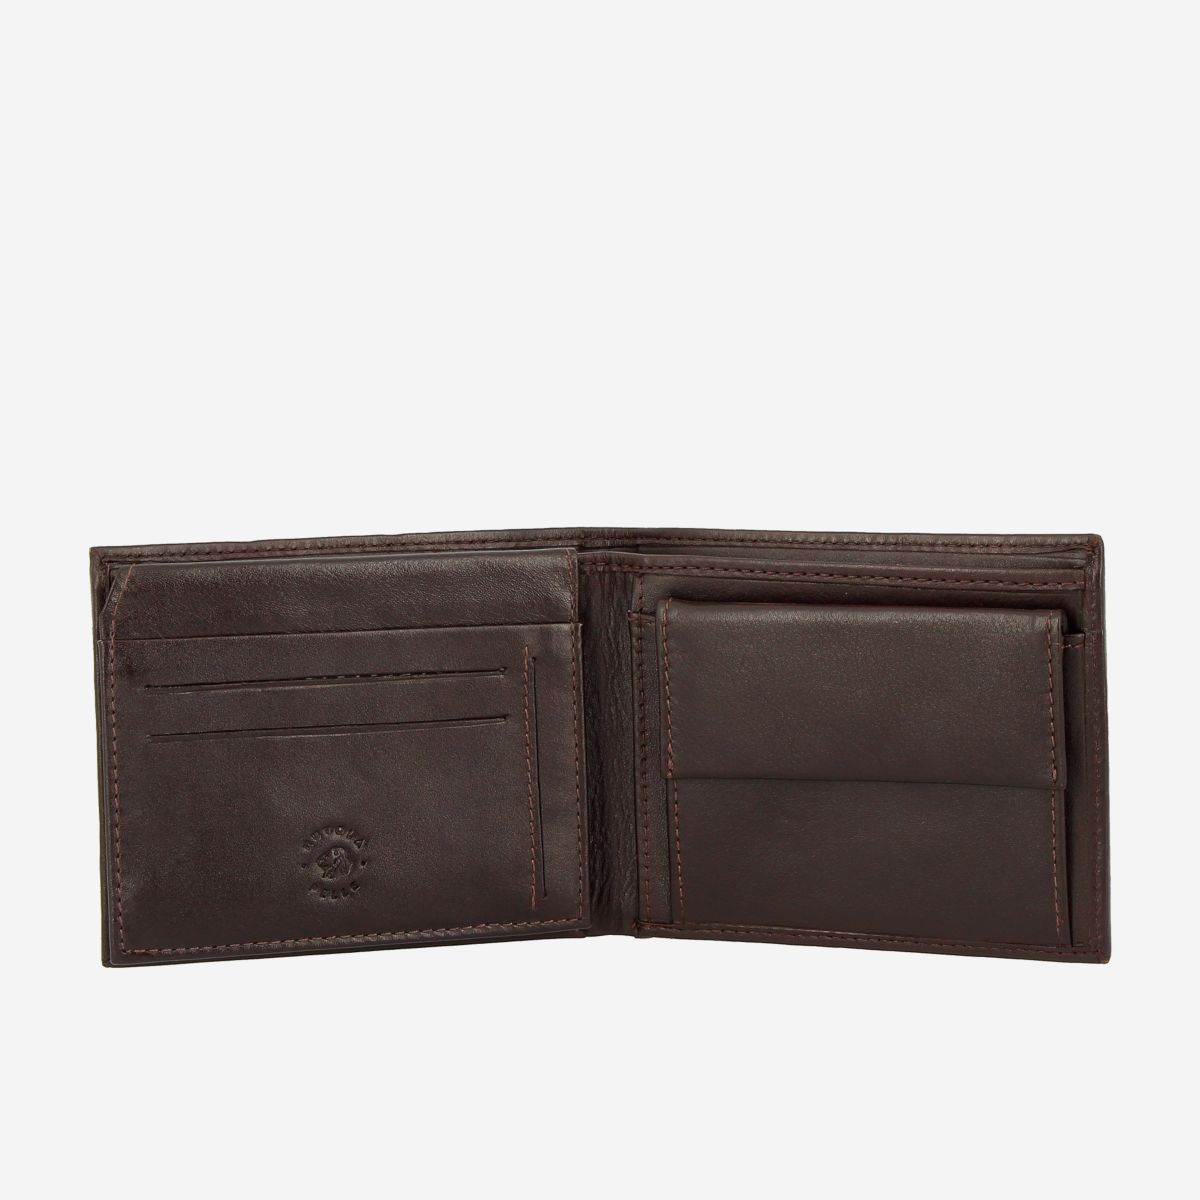 NUVOLA PELLE Elegant Mens Leather Wallet With Coin Coin Purse - Dark Brown